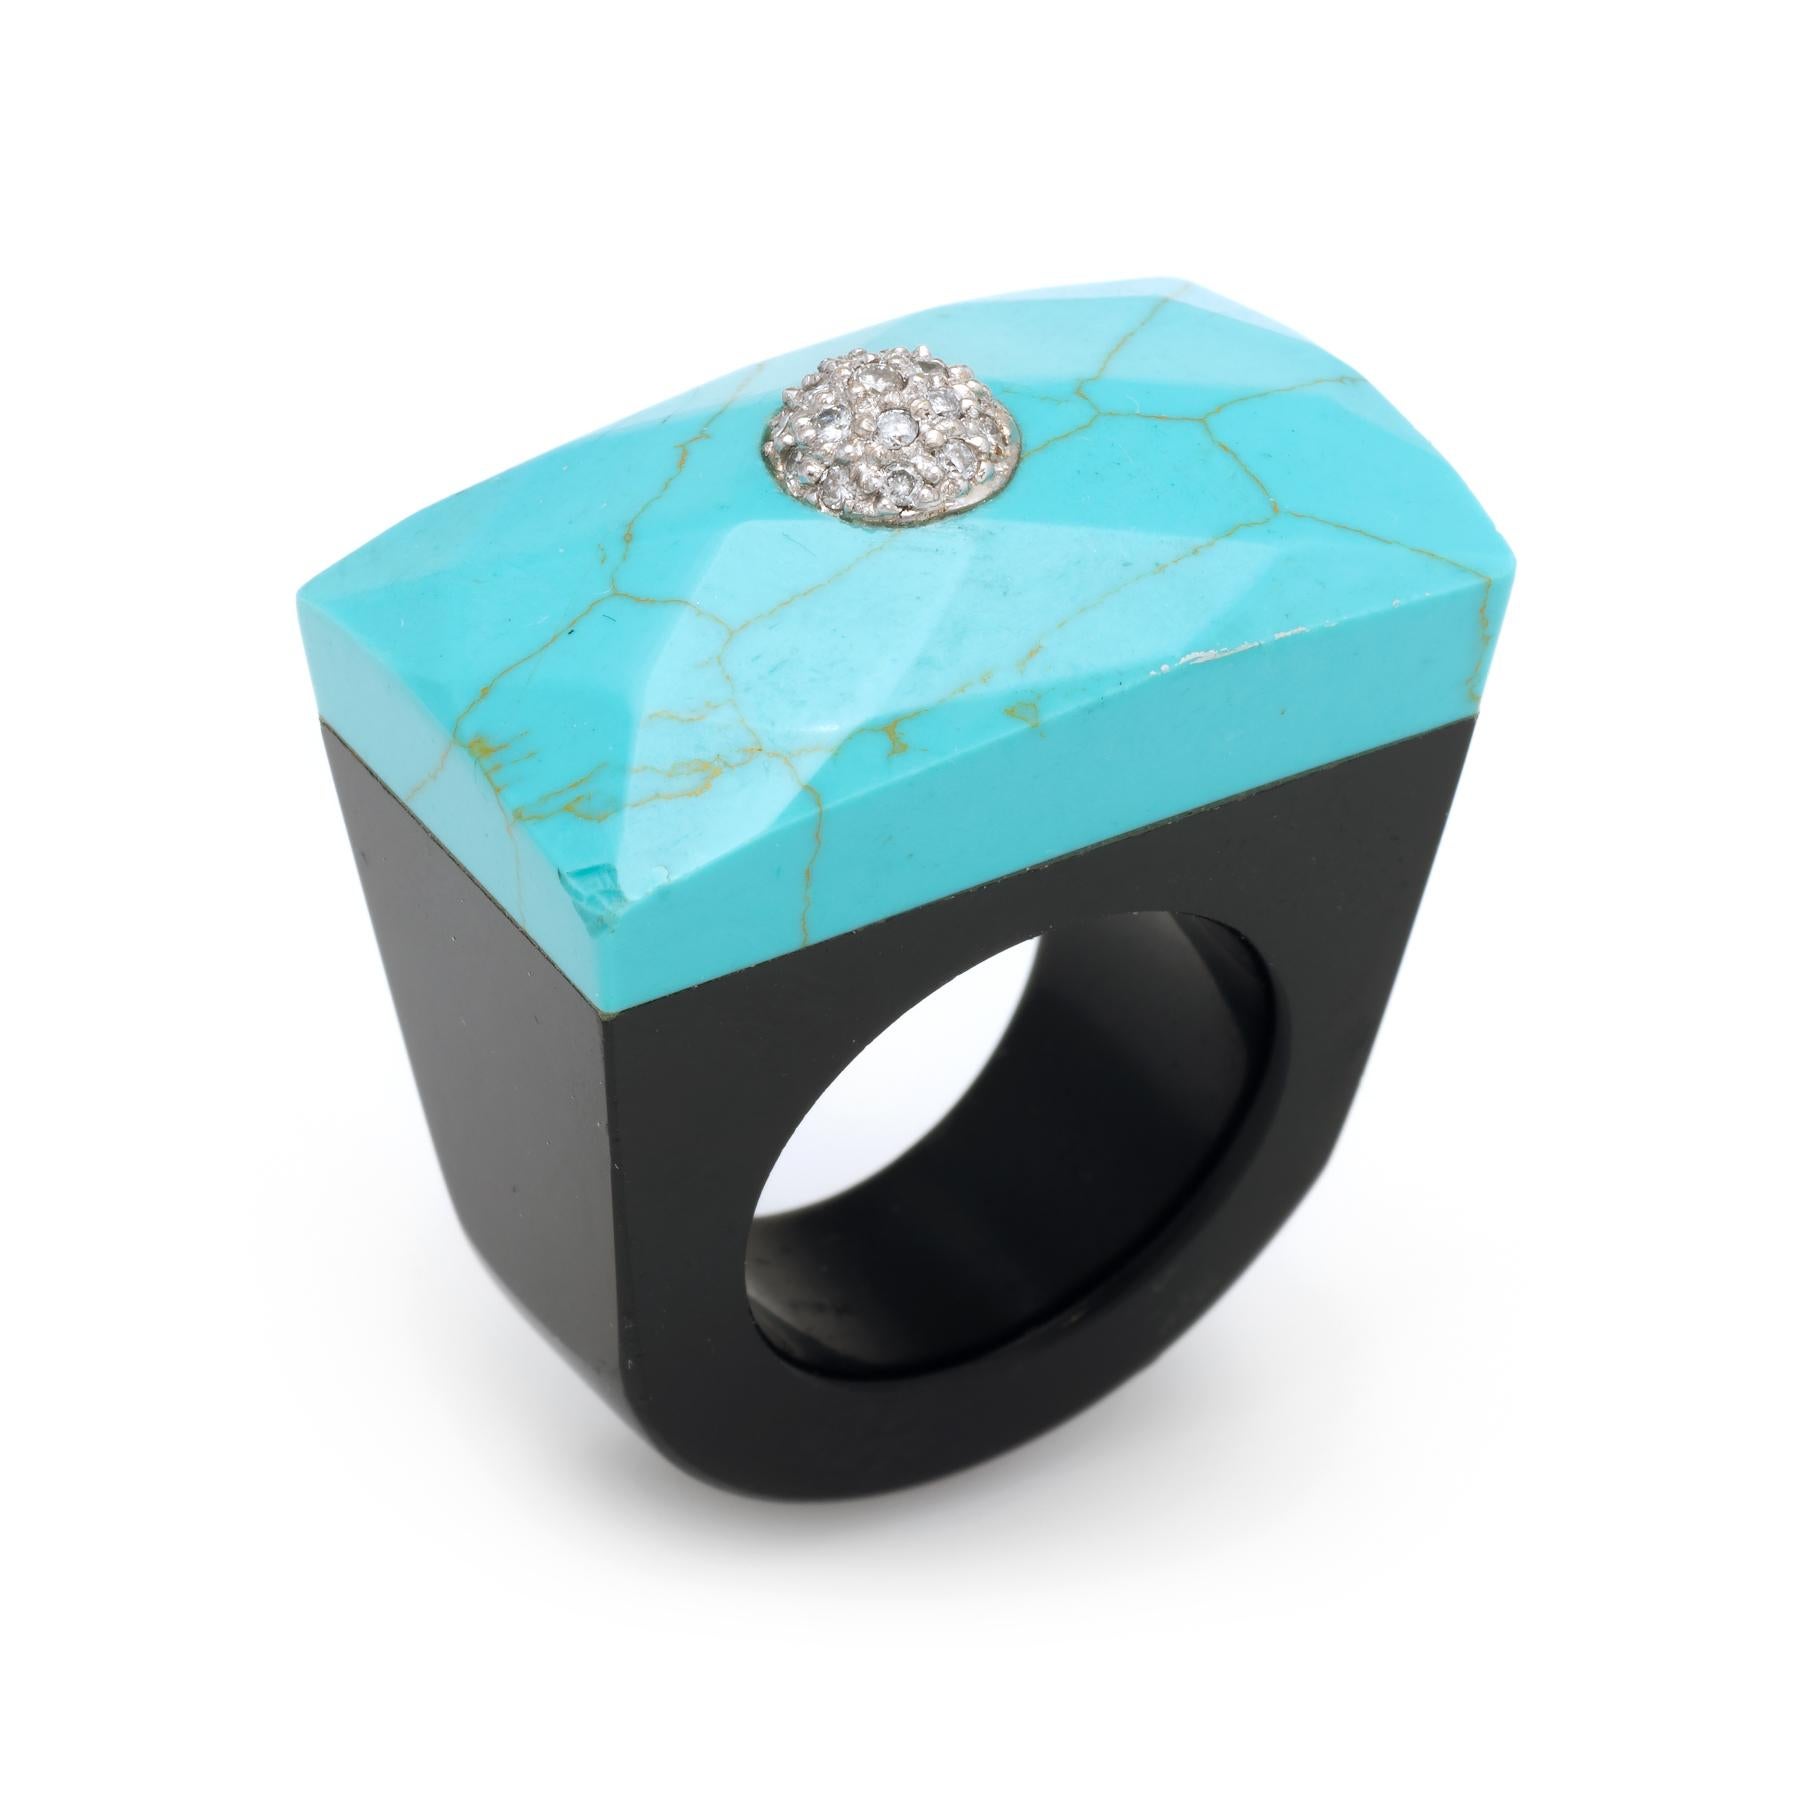 Large statement east west cocktail ring, finished with a pave diamond dome in 18 karat white gold. 

Centrally mounted pave set diamonds total an estimated 0.10 carats (estimated at I-J color and SI1-2 clarity). The turquoise measures 31mm (1.22